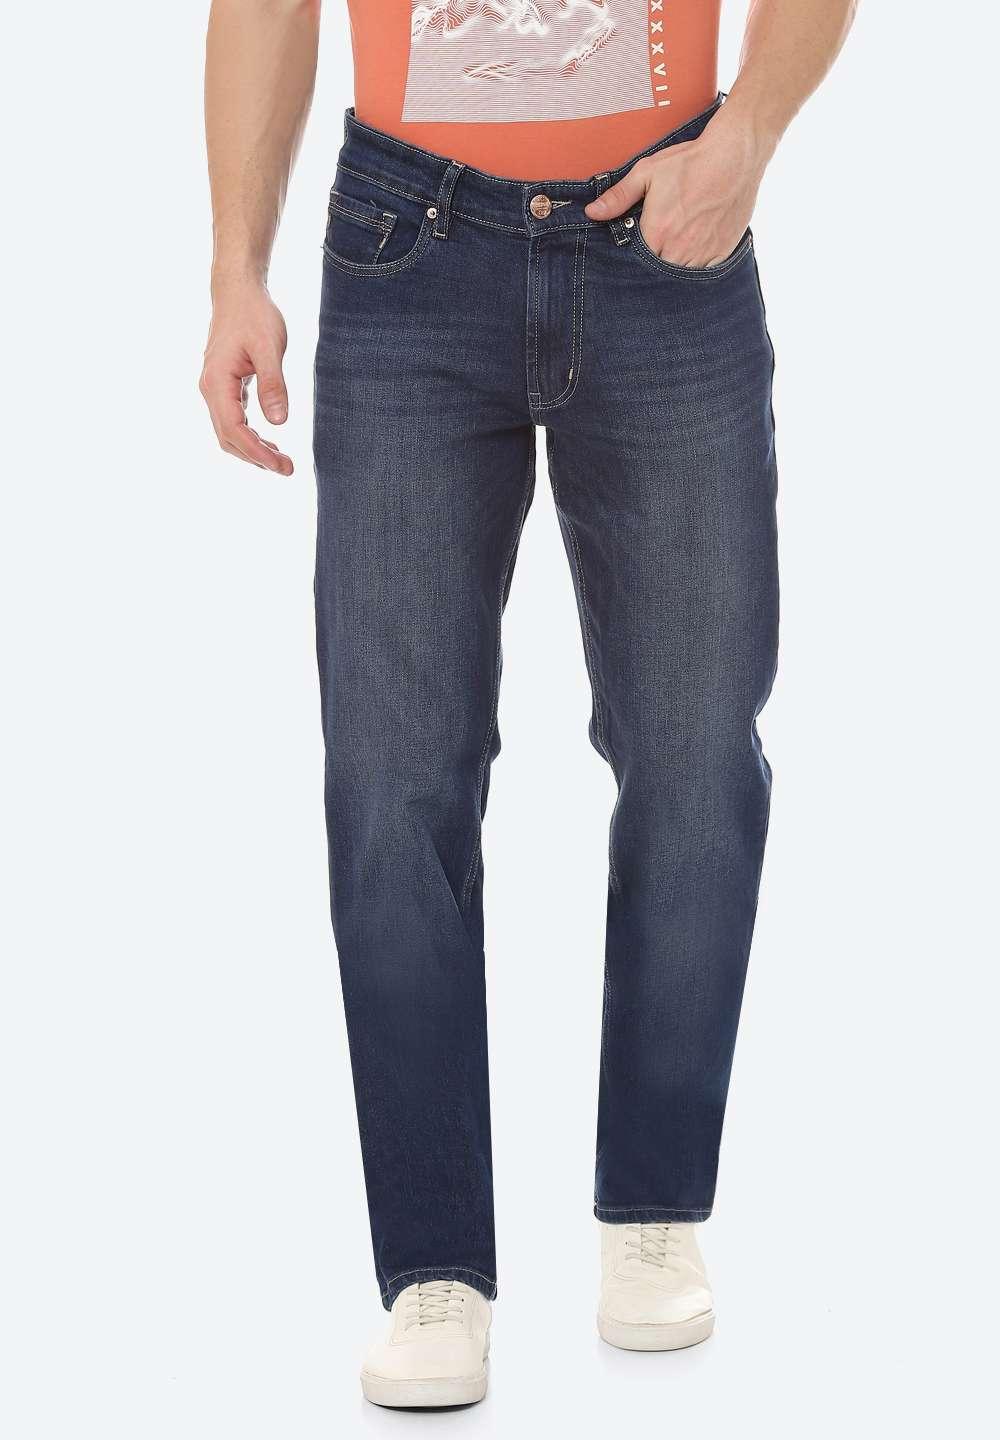 Men''s Straight Fit Jeans at Rs 300/piece, Straight Jeans Men in Chennai